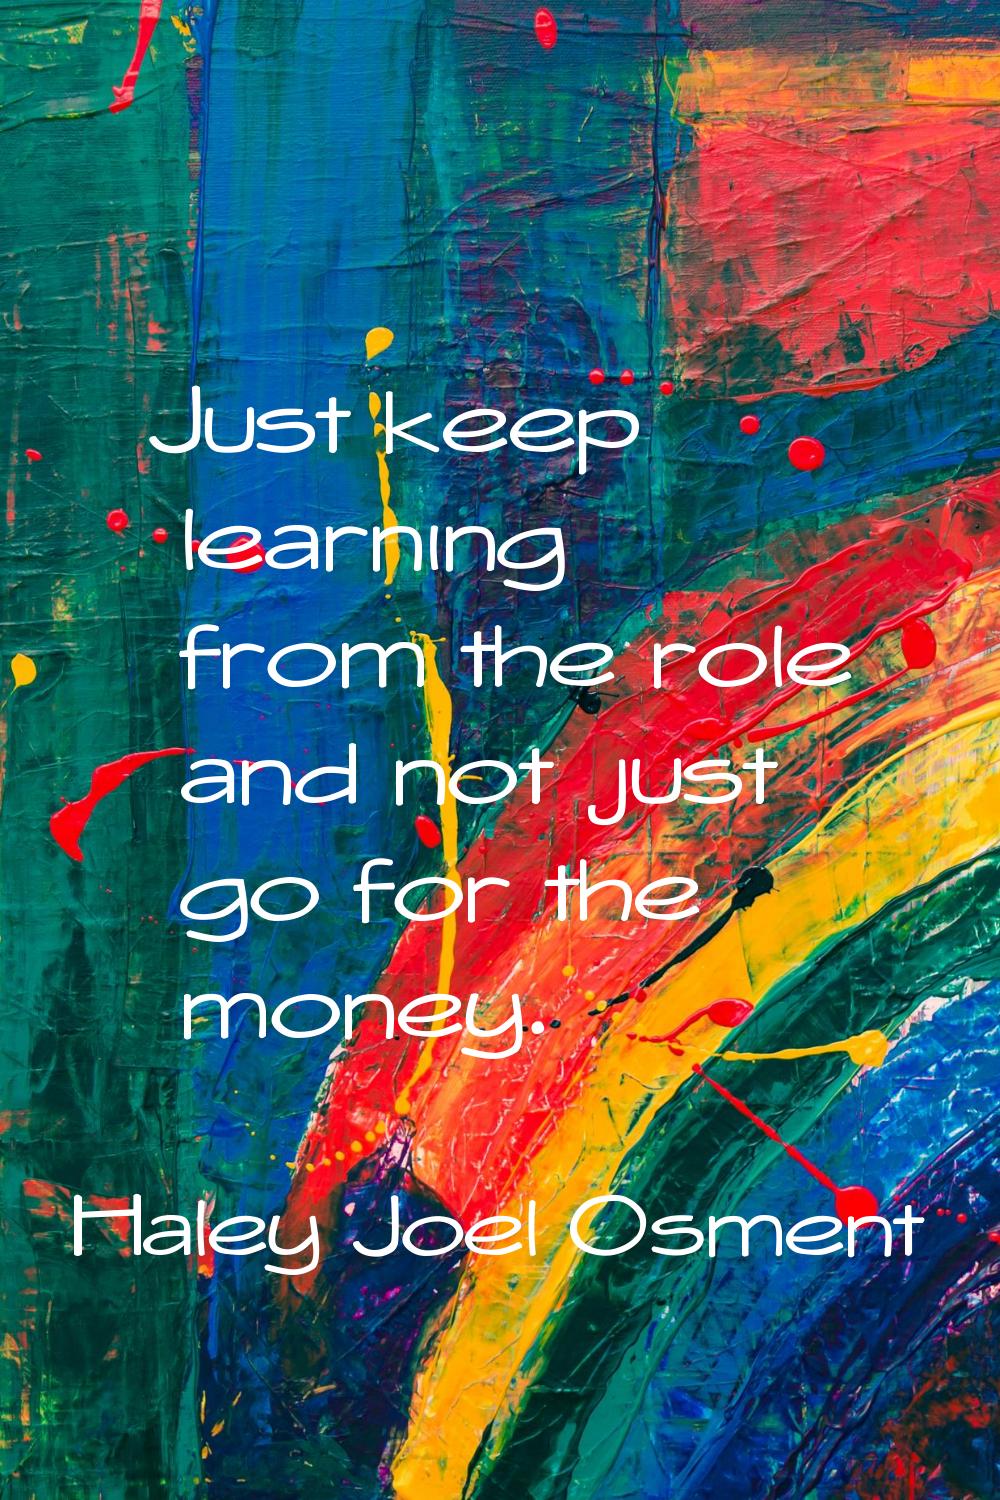 Just keep learning from the role and not just go for the money.